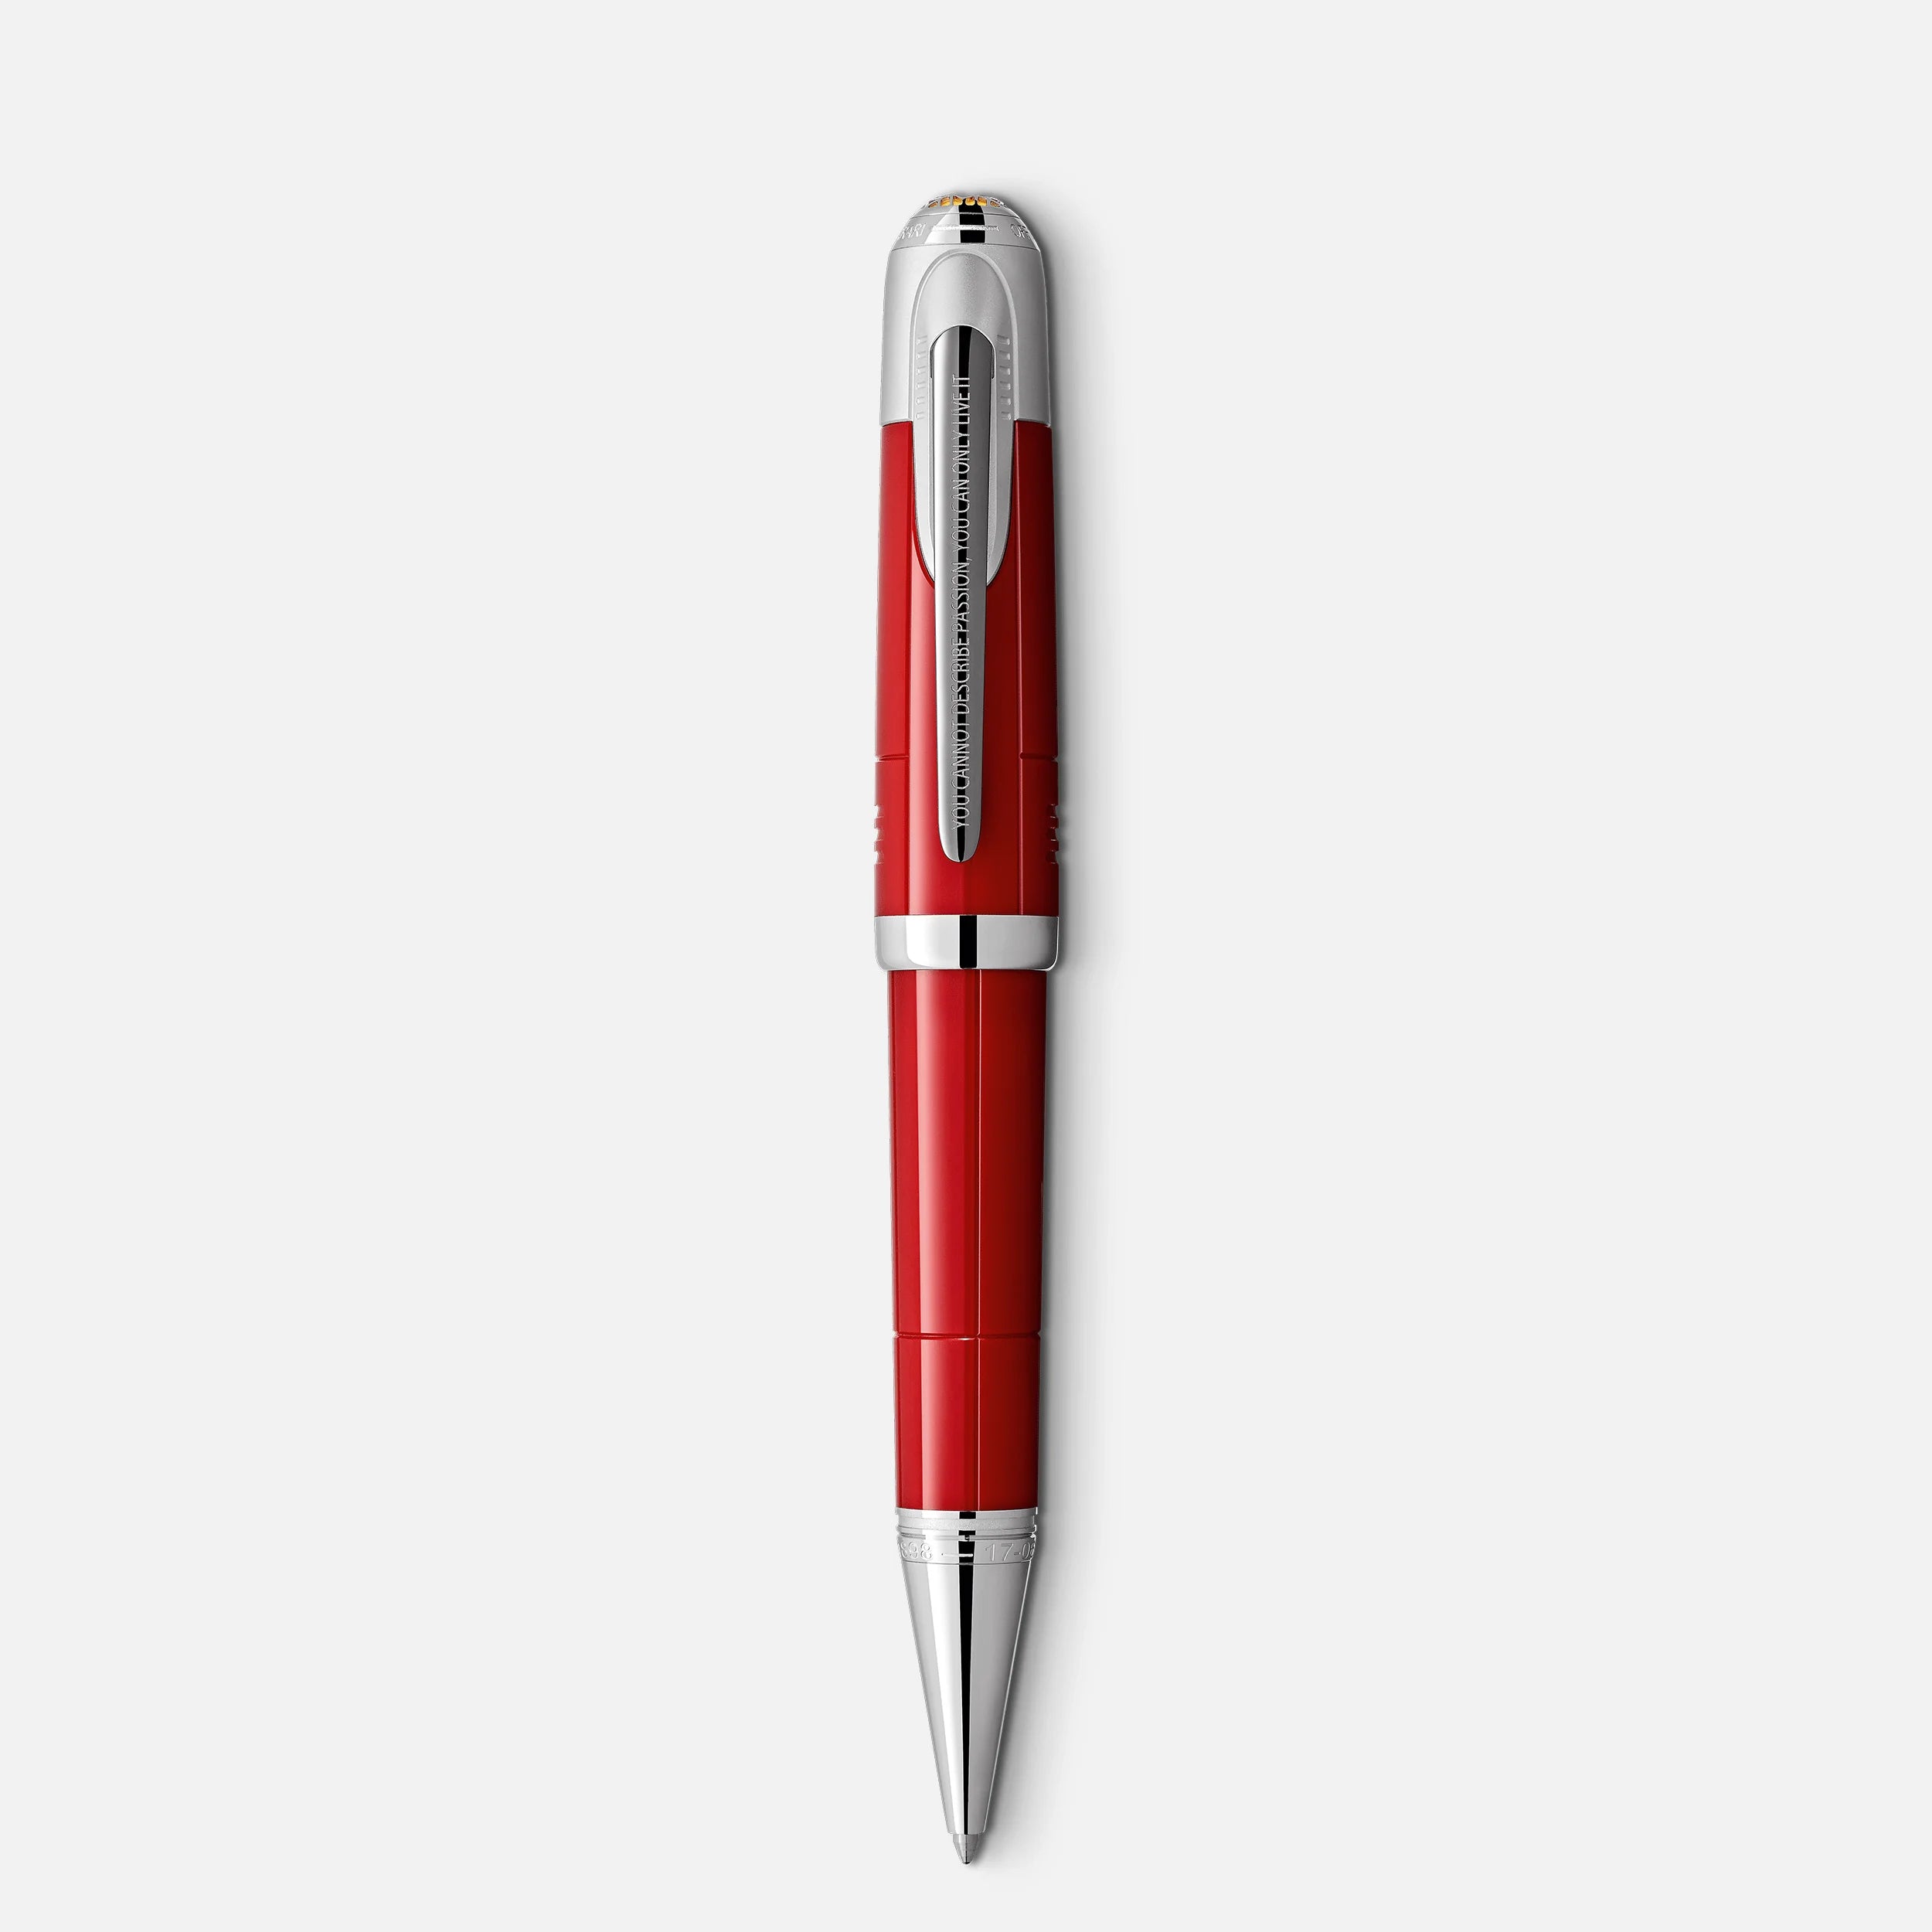 MONTBLANC | Penna a sfera Great Characters Enzo Ferrari Special Edition | MB127176